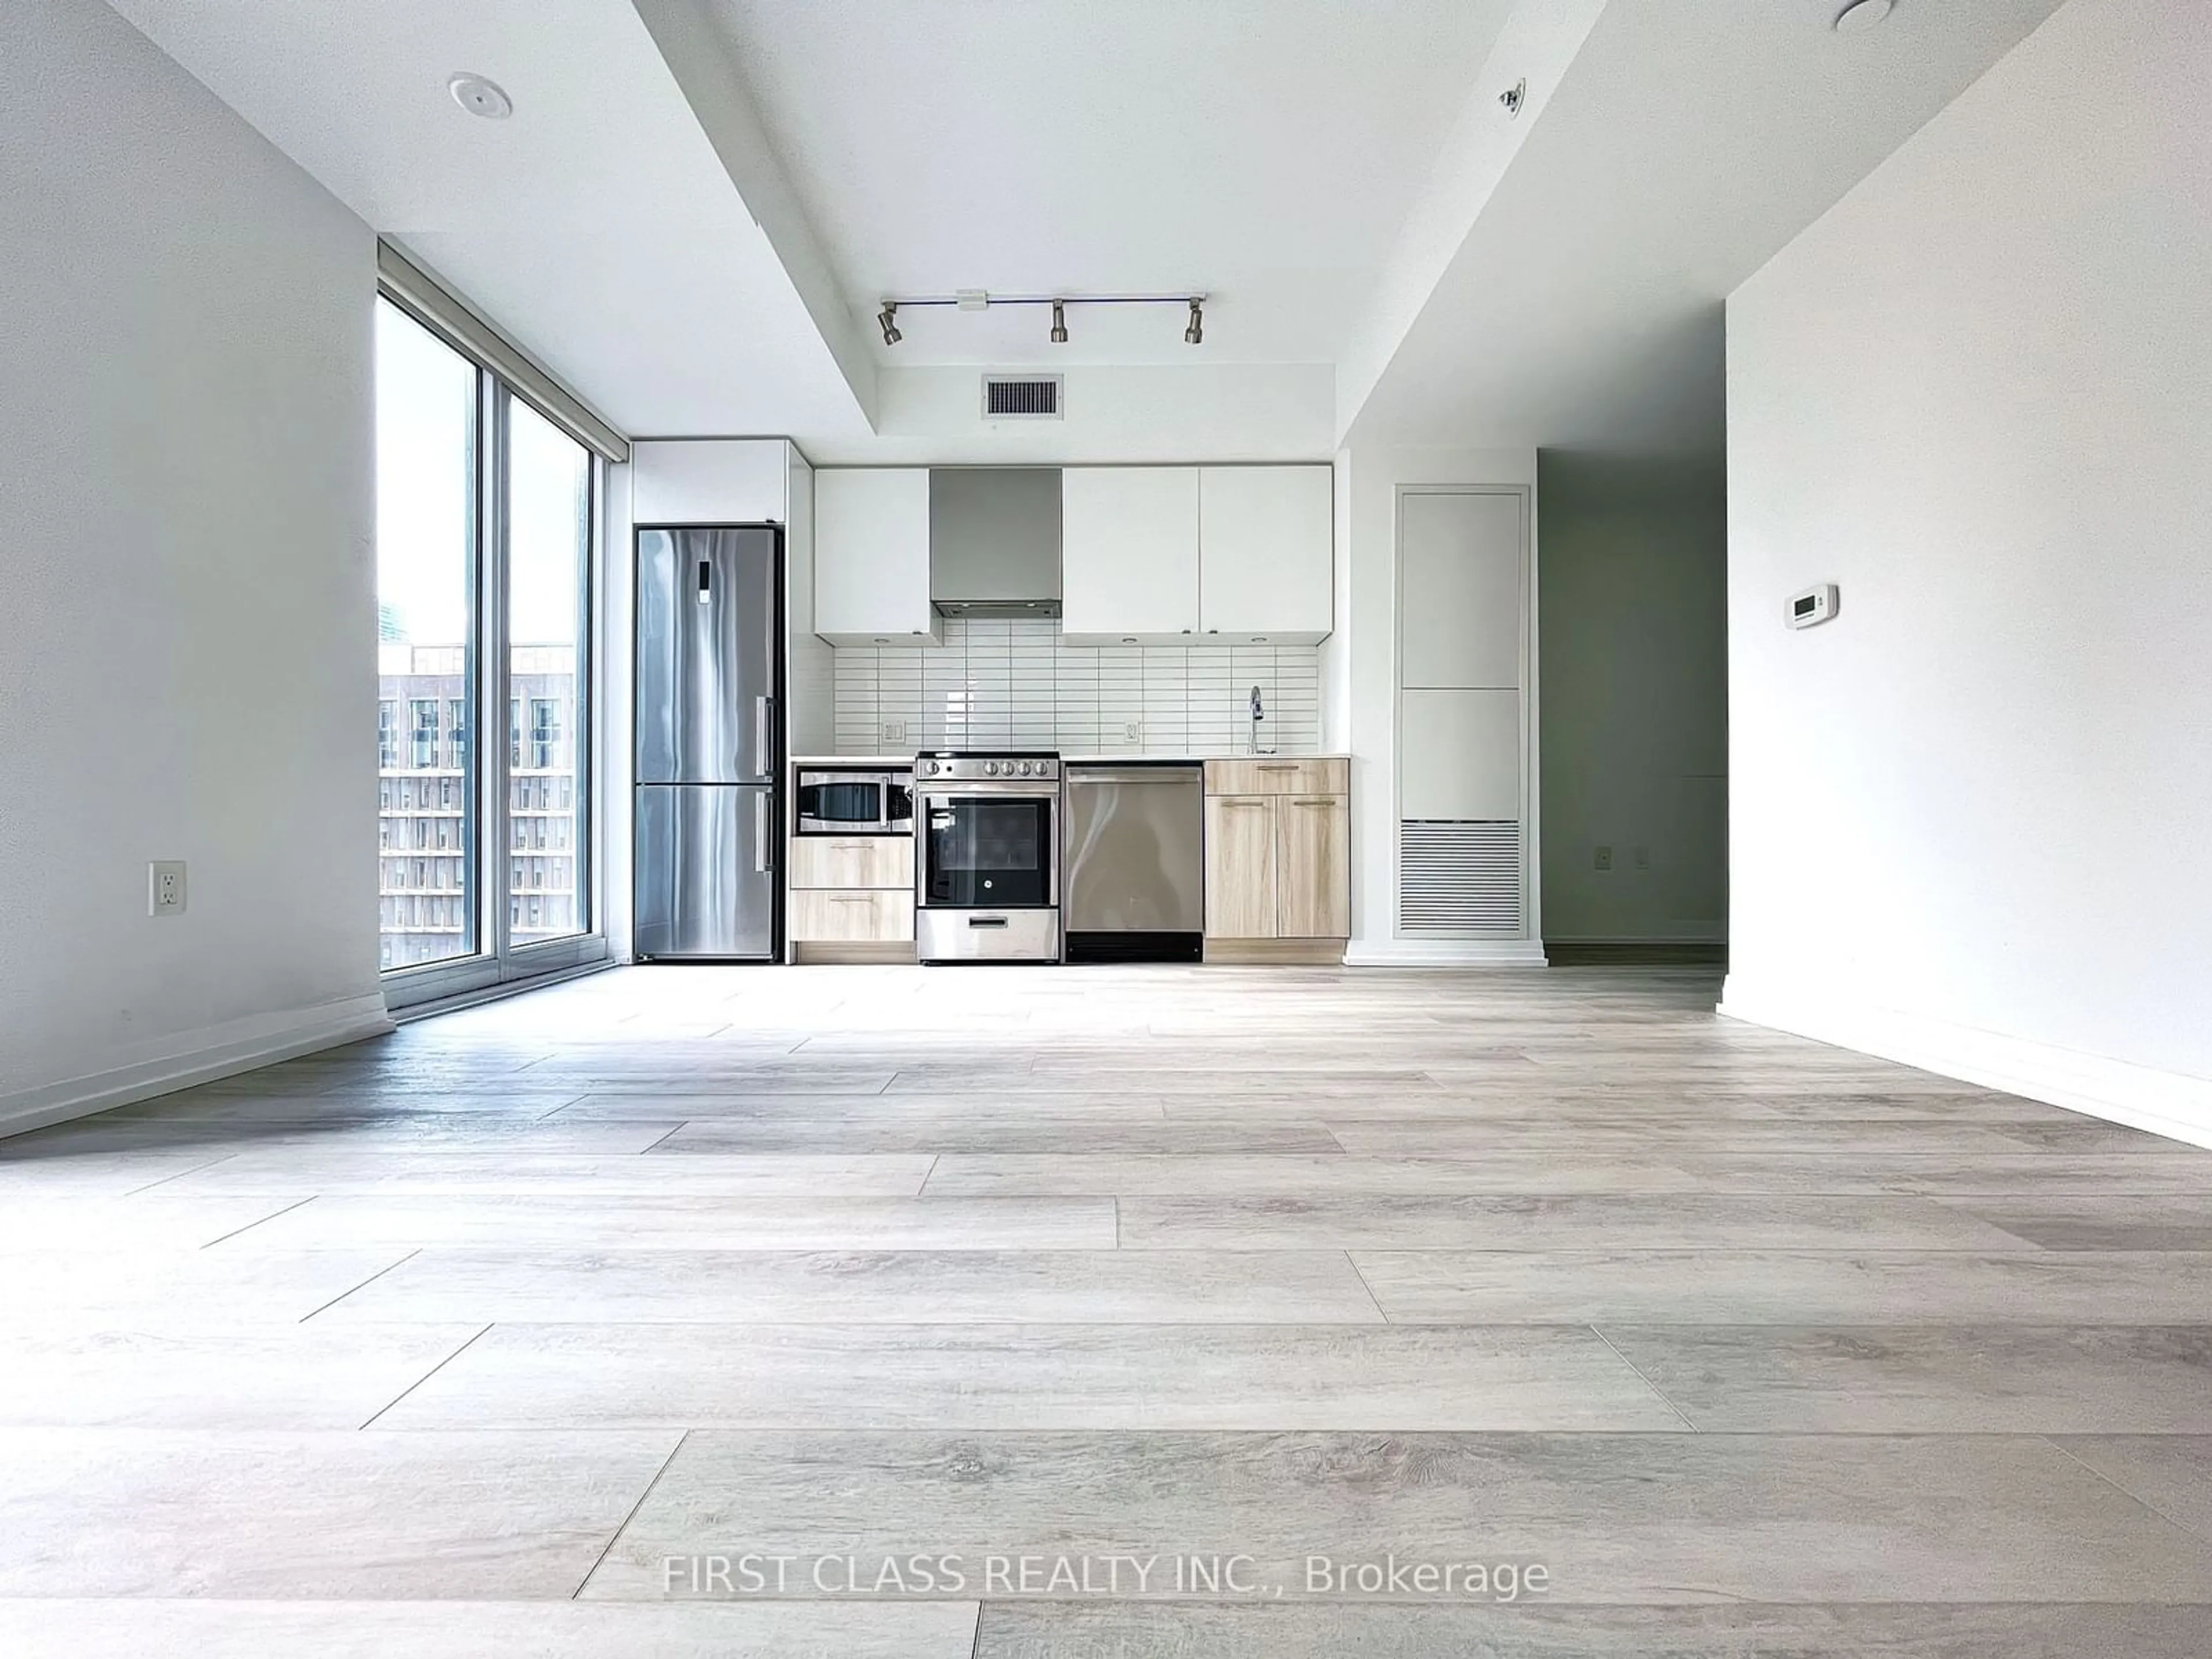 Other indoor space for 251 Jarvis St #826, Toronto Ontario M5B 0C3